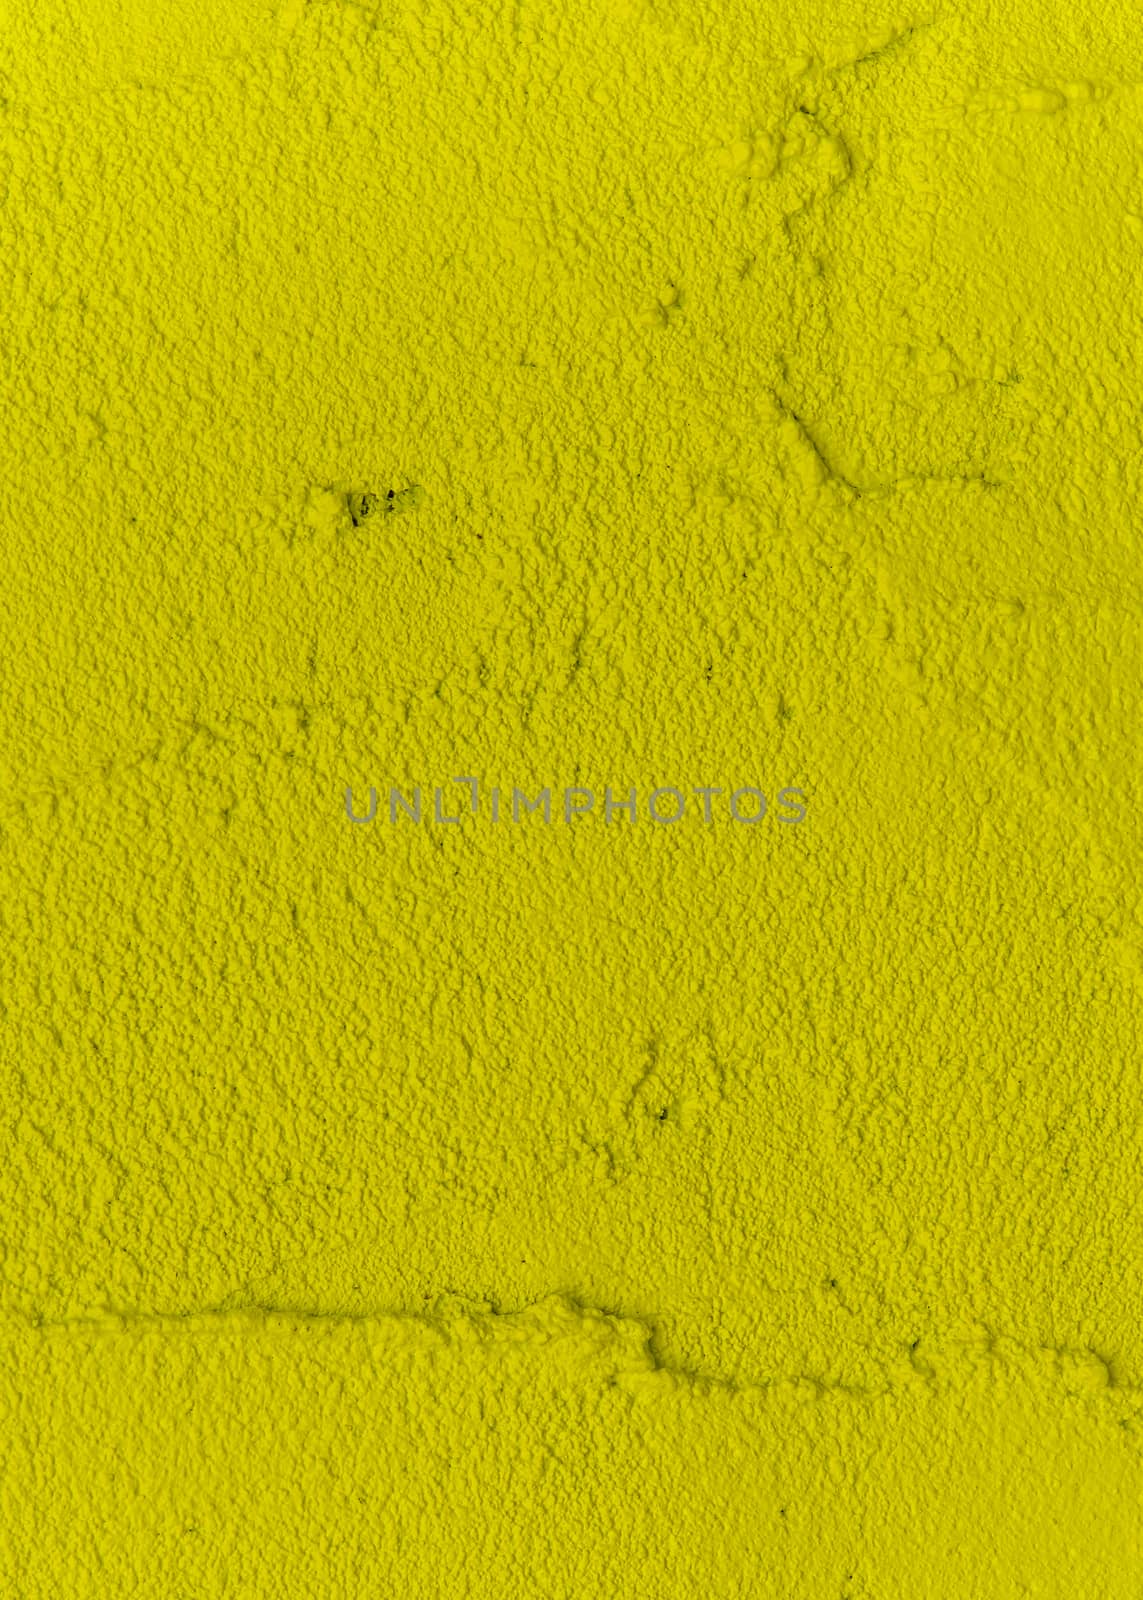 Yellow cement floor background.For art texture for web design an by toodlingstudio